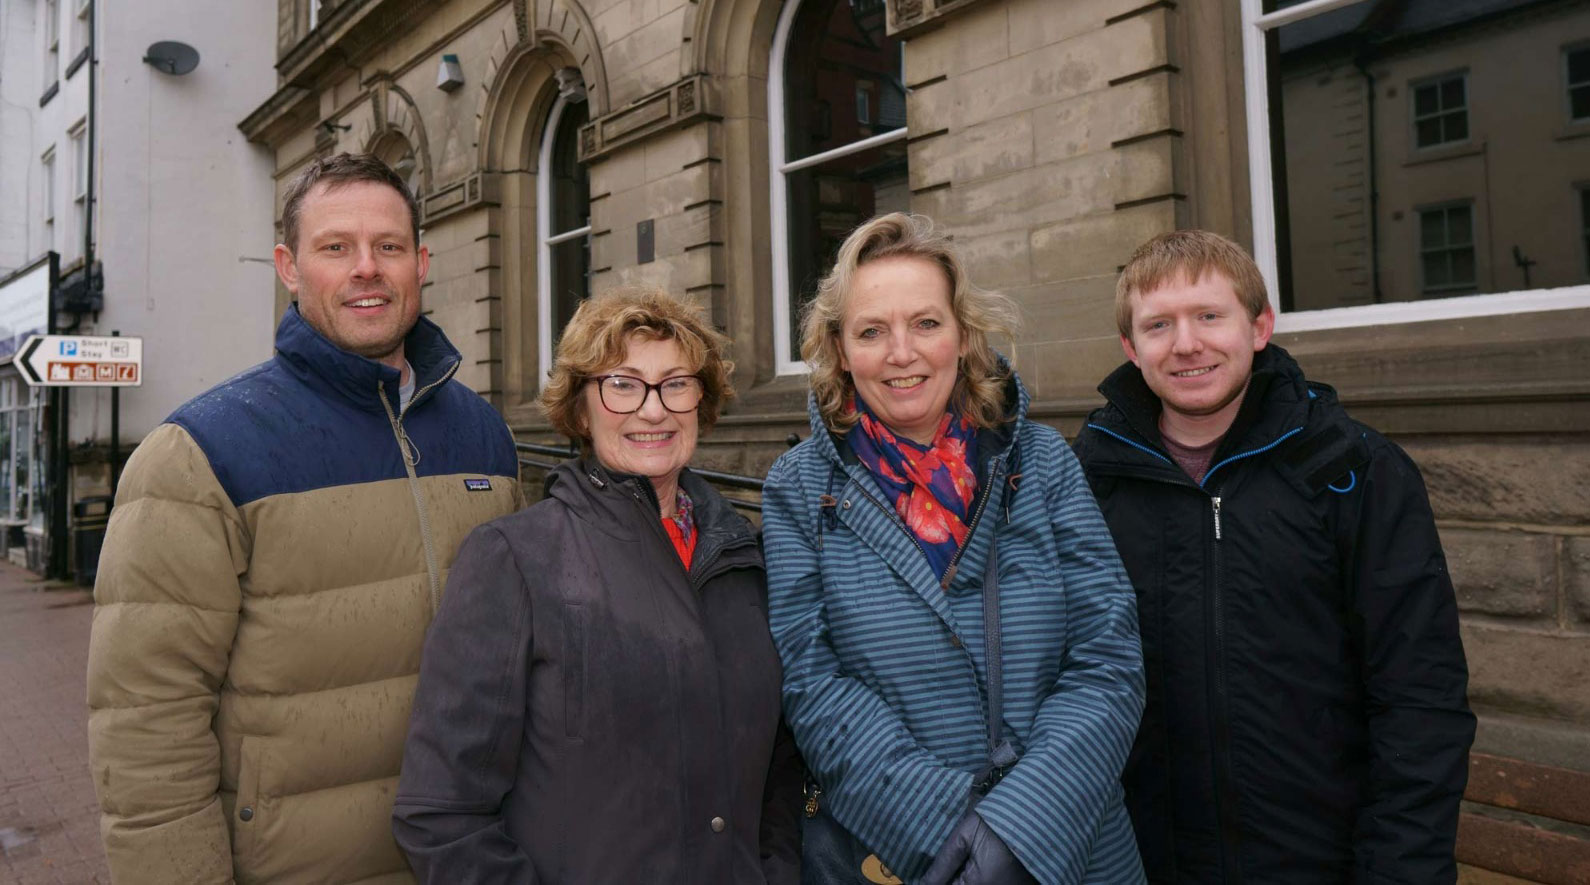 left to right – Tim Sutherland, Liz Baxandall, Kathy Allday and Ed Darling